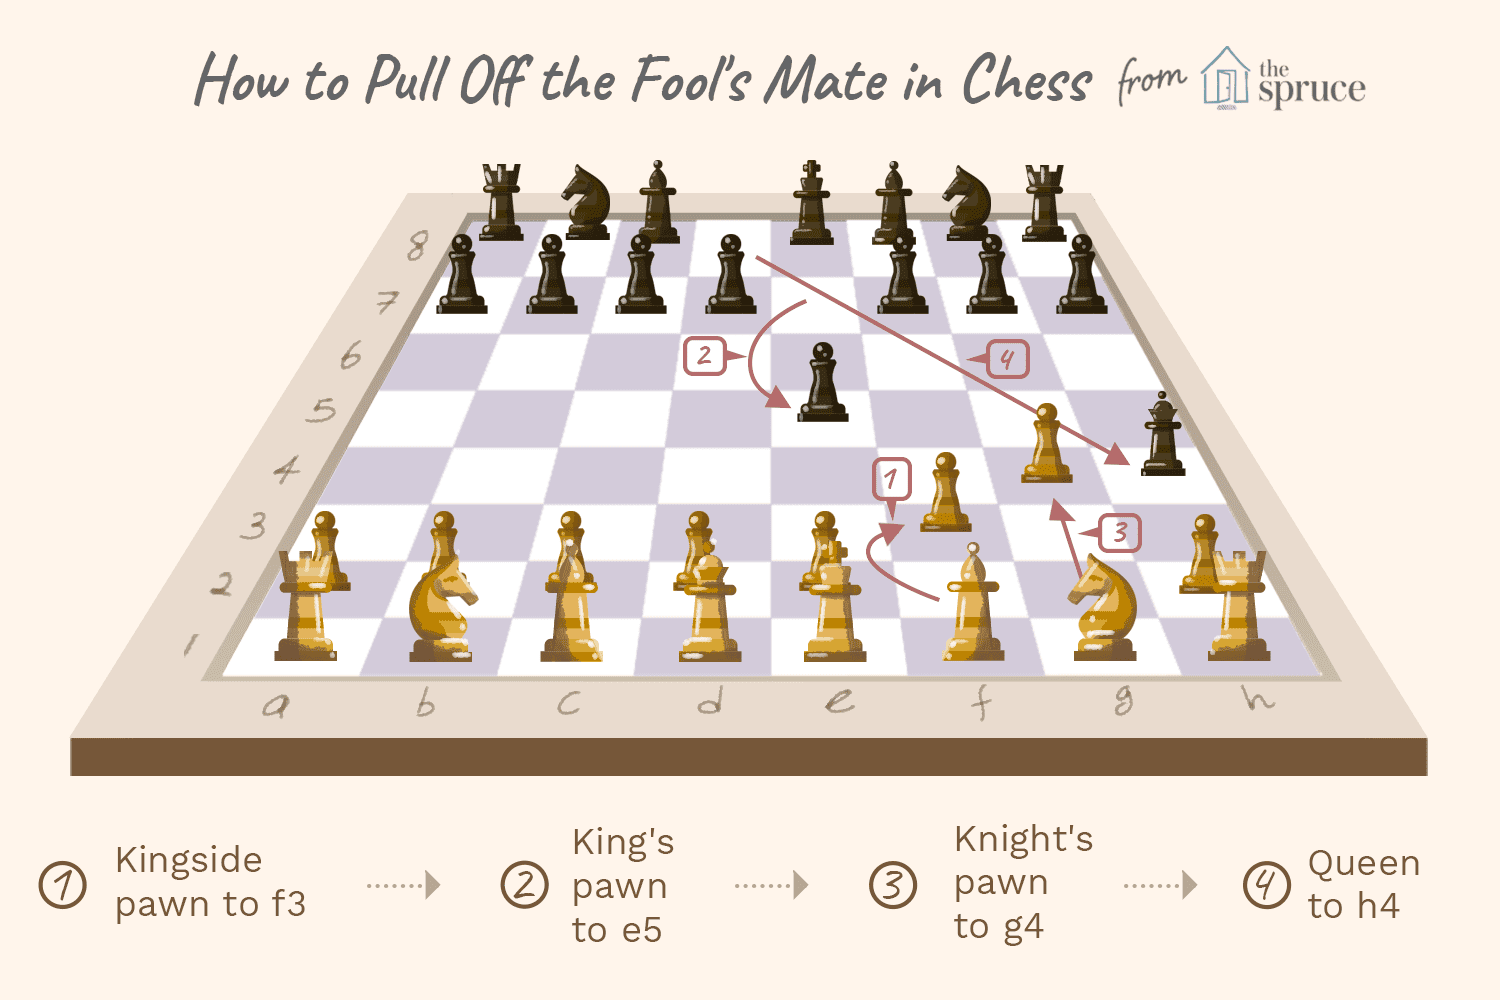 3 Ways to Fool Your Opponent in Chess - wikiHow